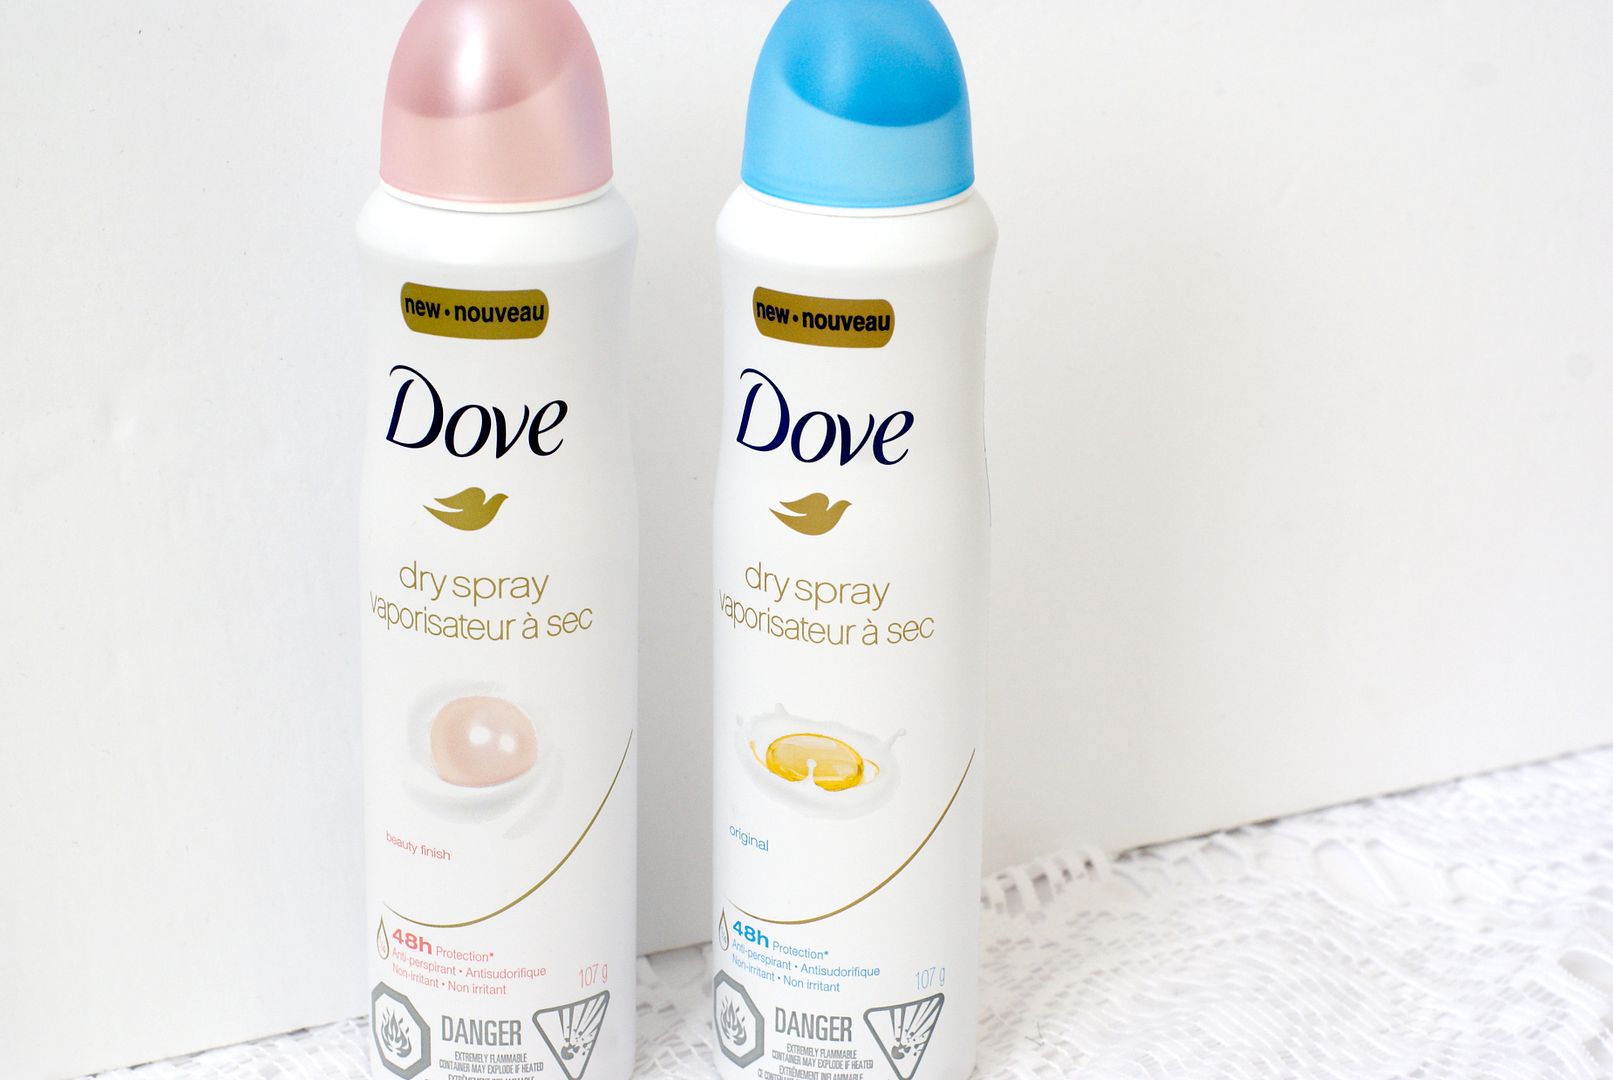 Dove Dry Spray Anti-Perspirant Review, Beauty Review, Deodorant